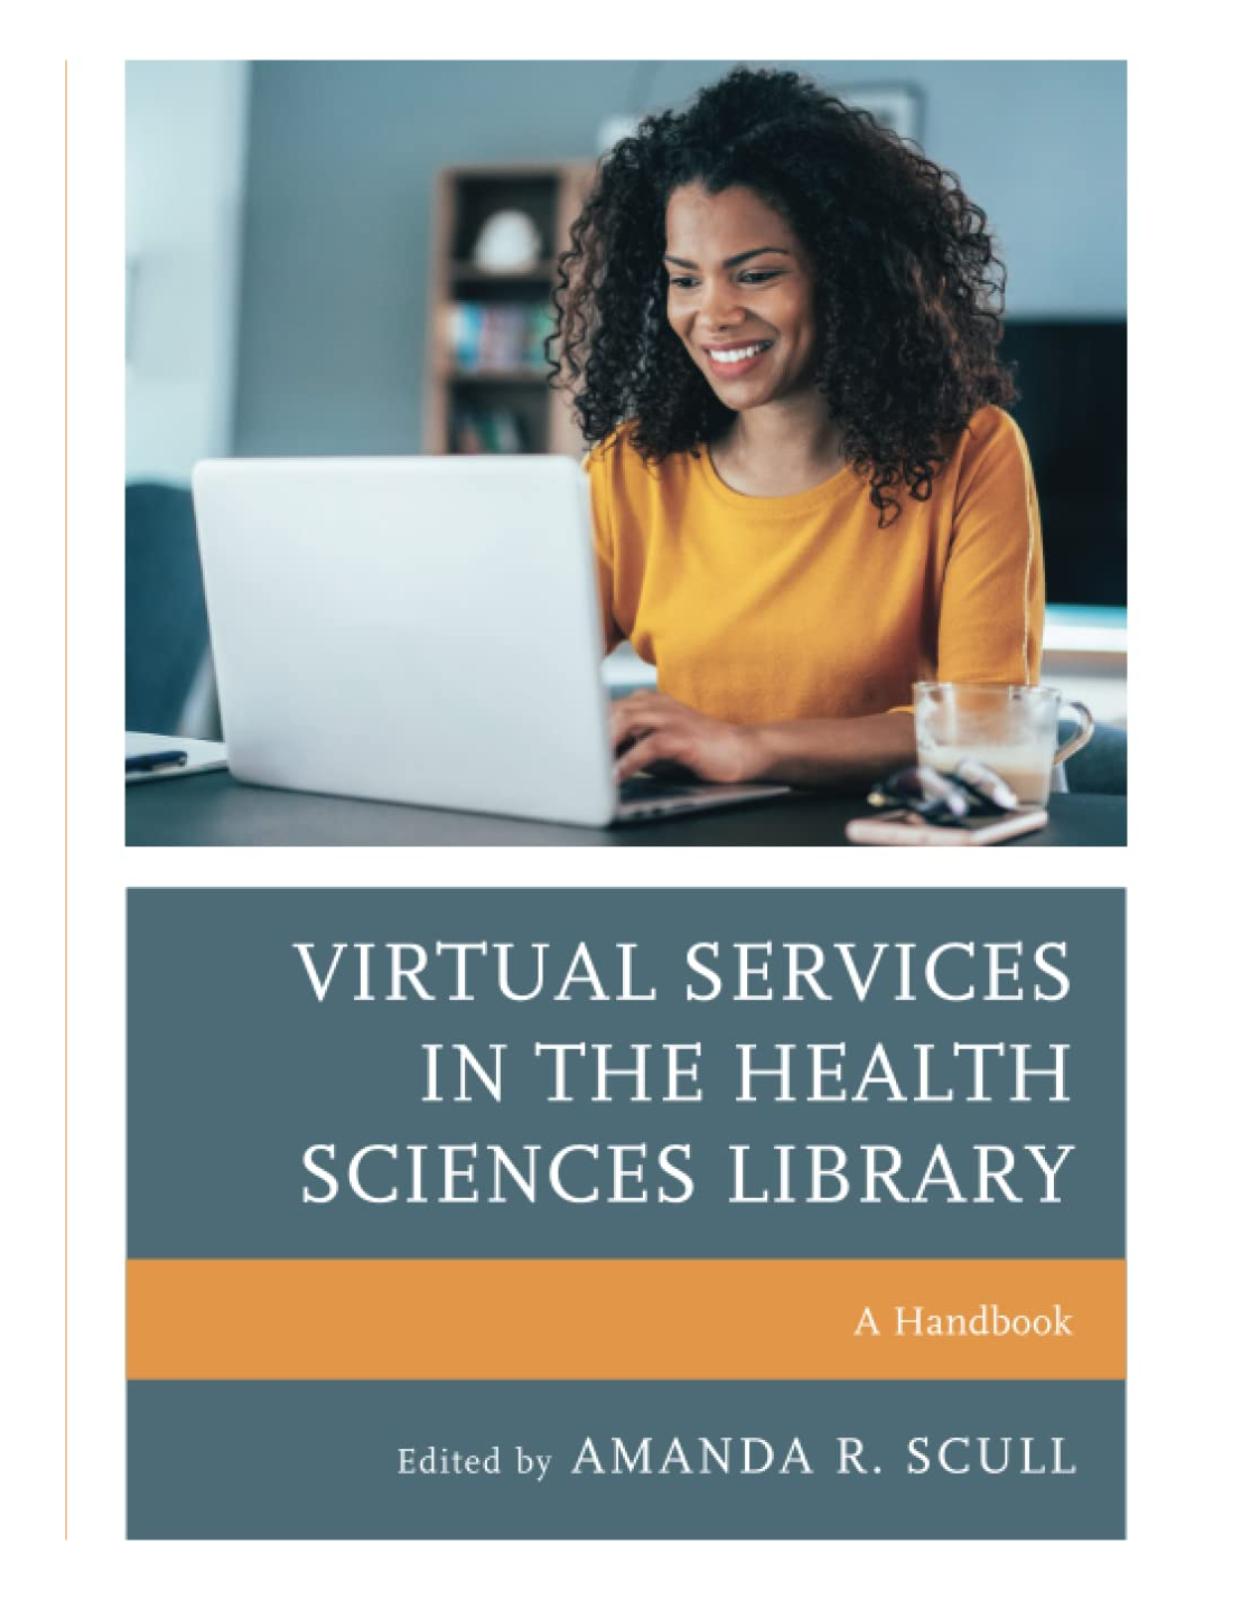 Virtual Services in the Health Sciences Library